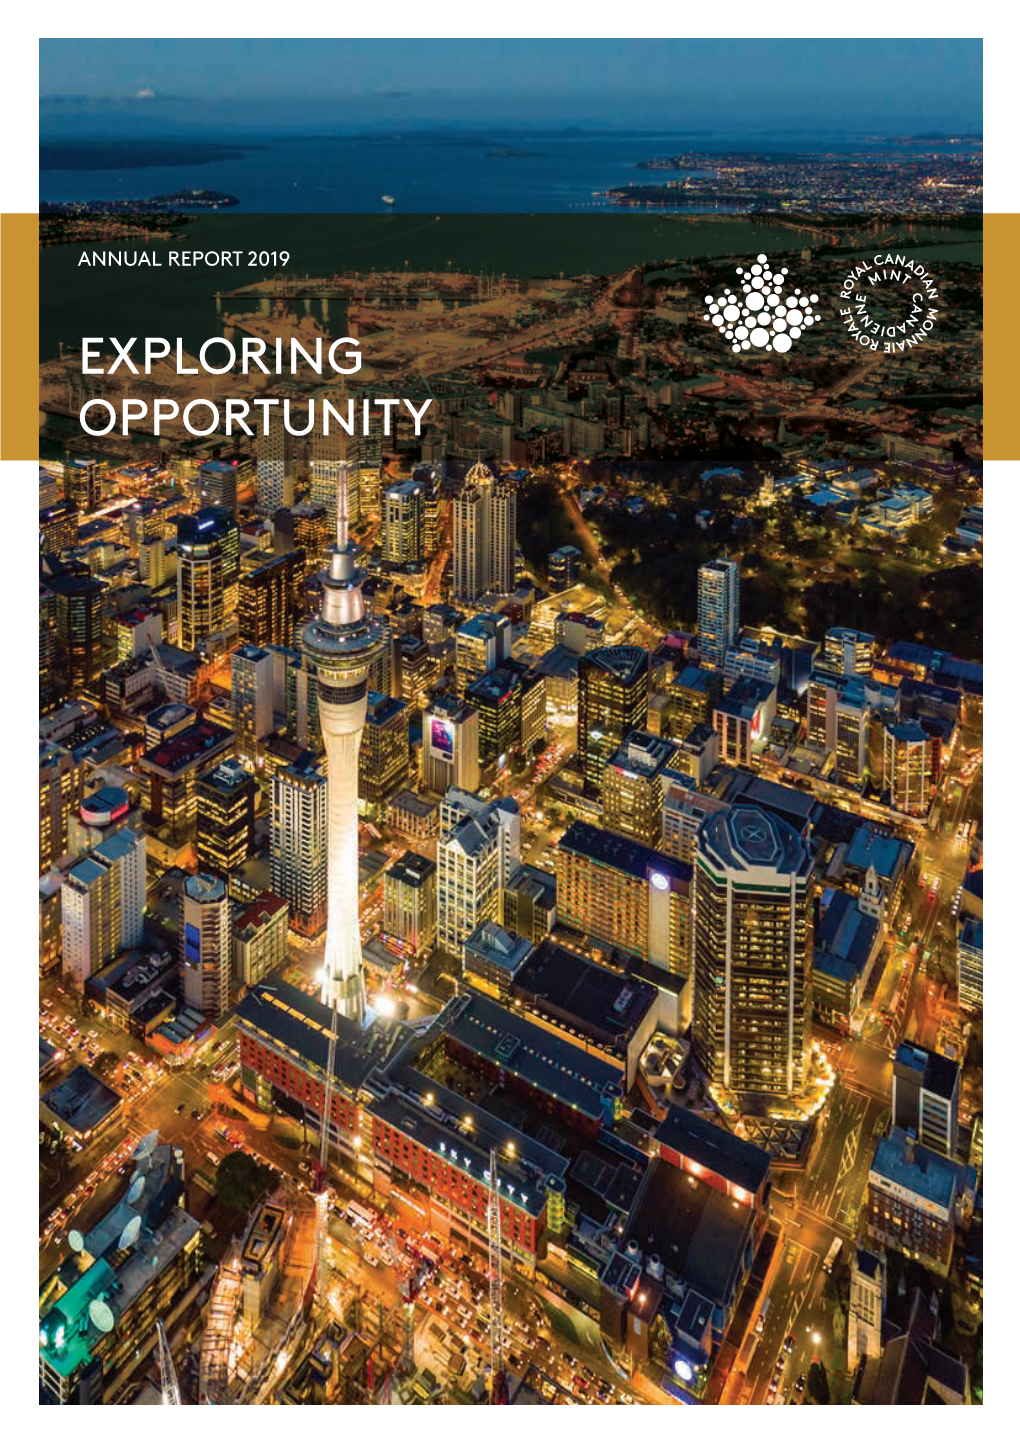 Royal Canadian Mint Annual Report 2019: Exploring Opportunity